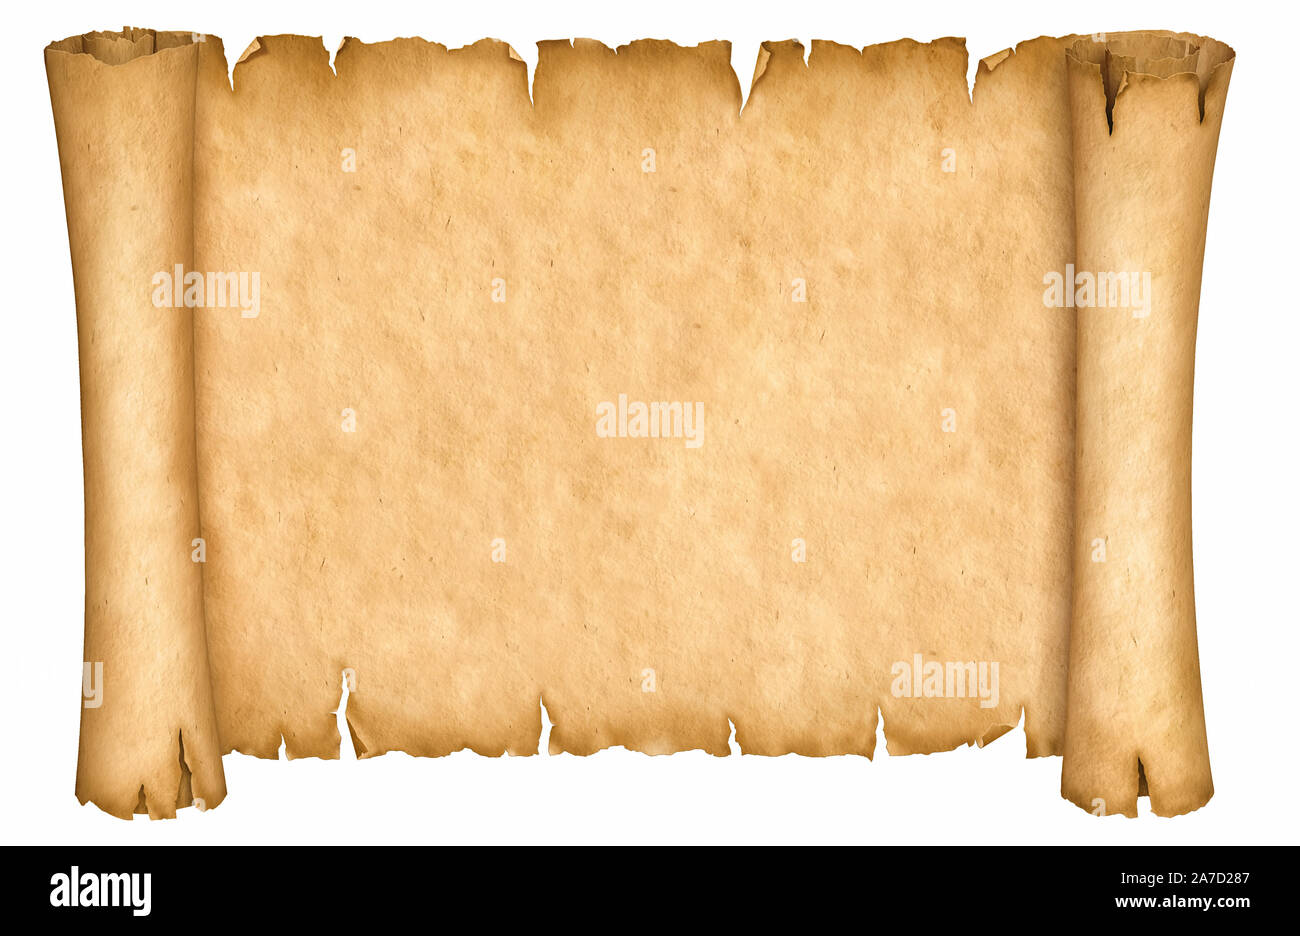 Image of Unfolded Roll of Old Parchment